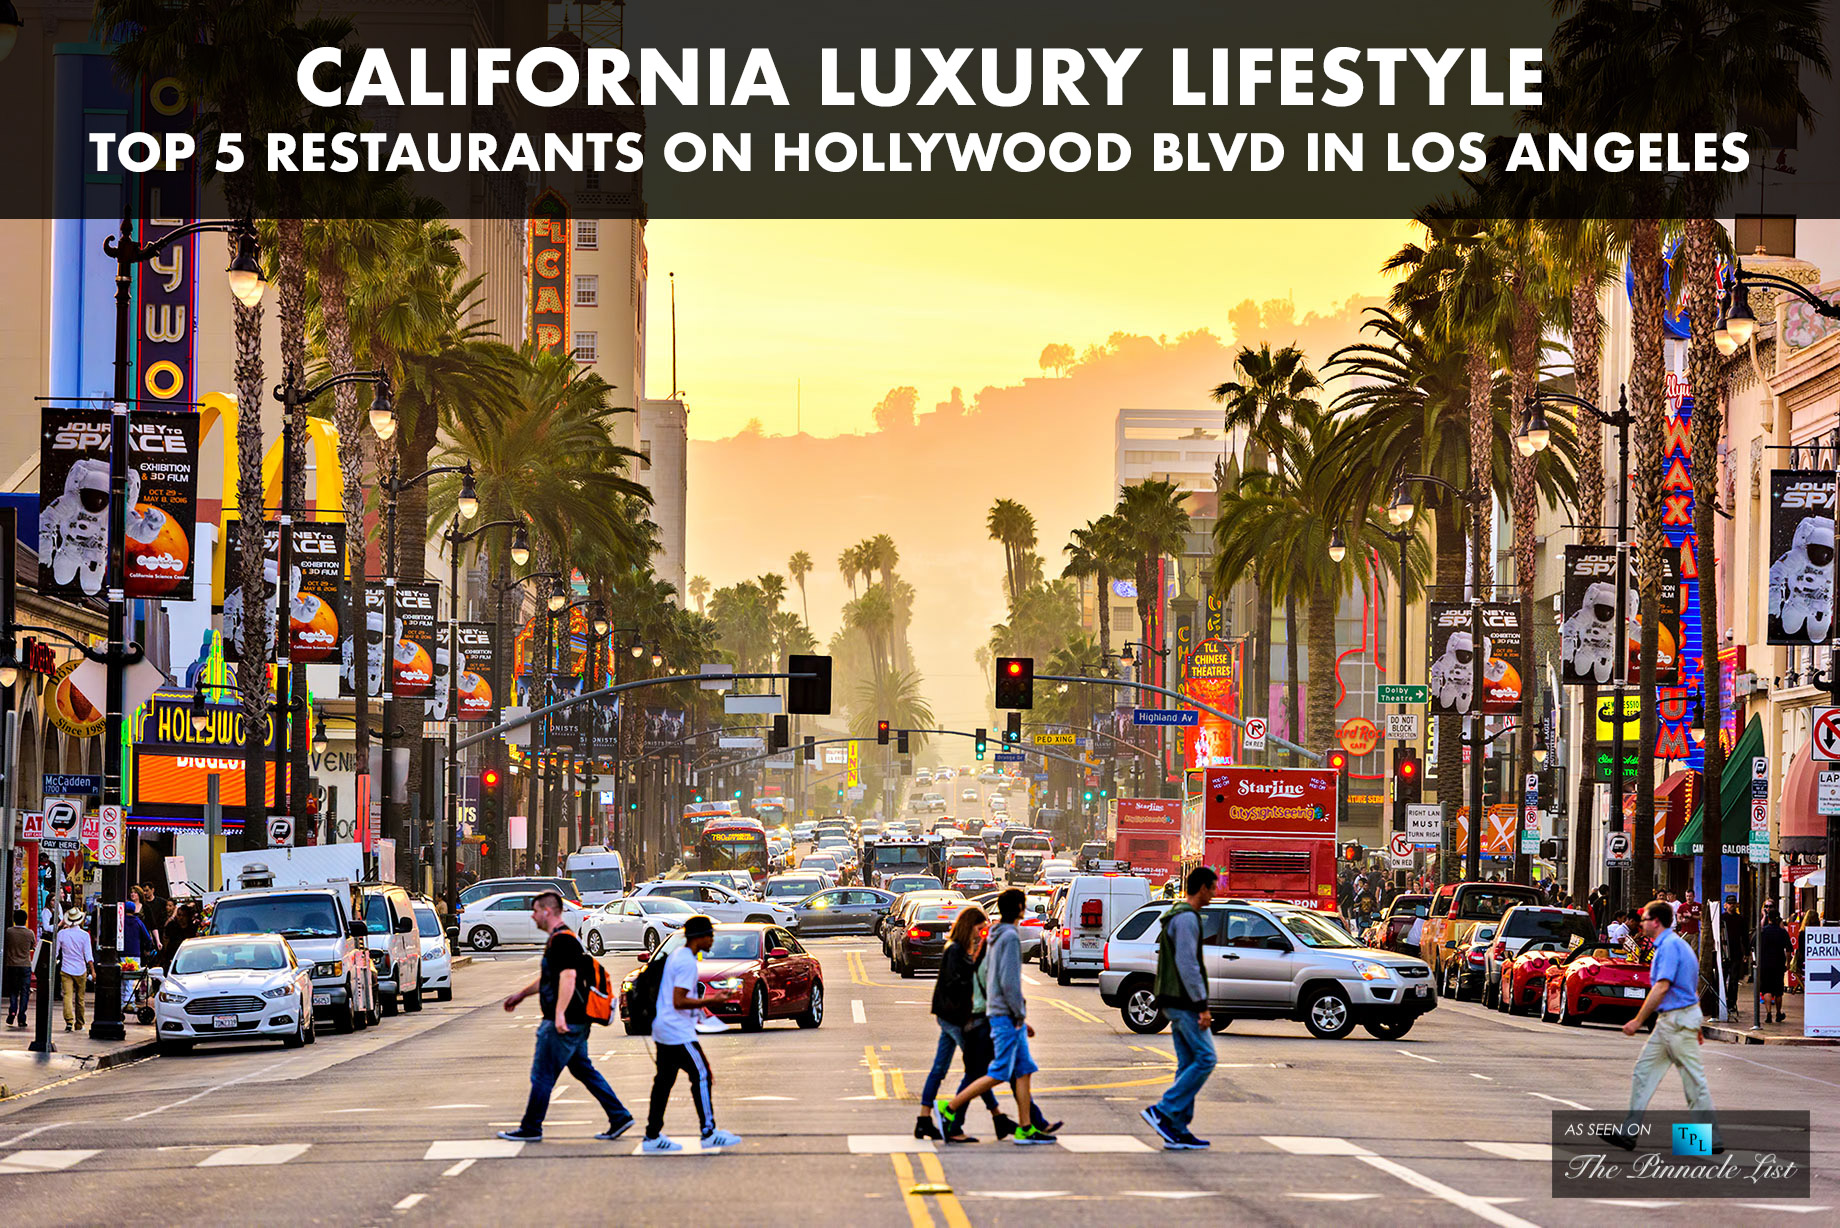 California Luxury Lifestyle – Top 5 Restaurants on Hollywood Blvd in Los Angeles